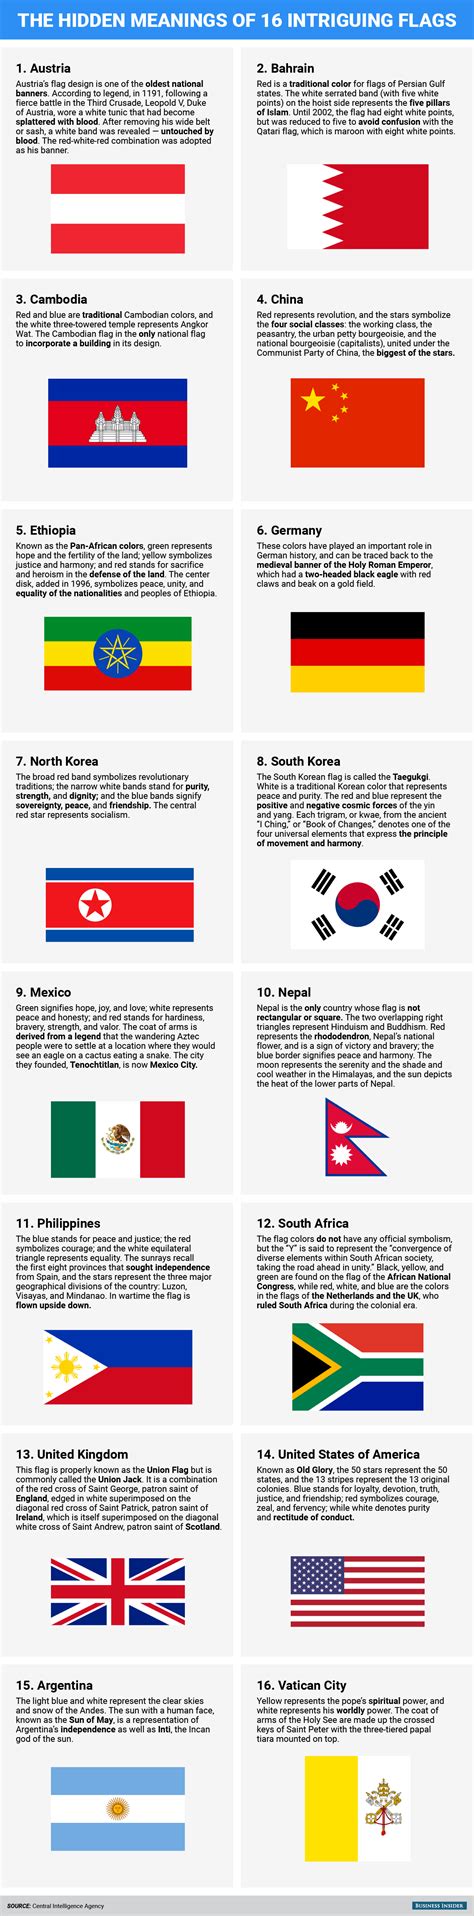 16 Intriguing World Flags And Their Hidden Meanings